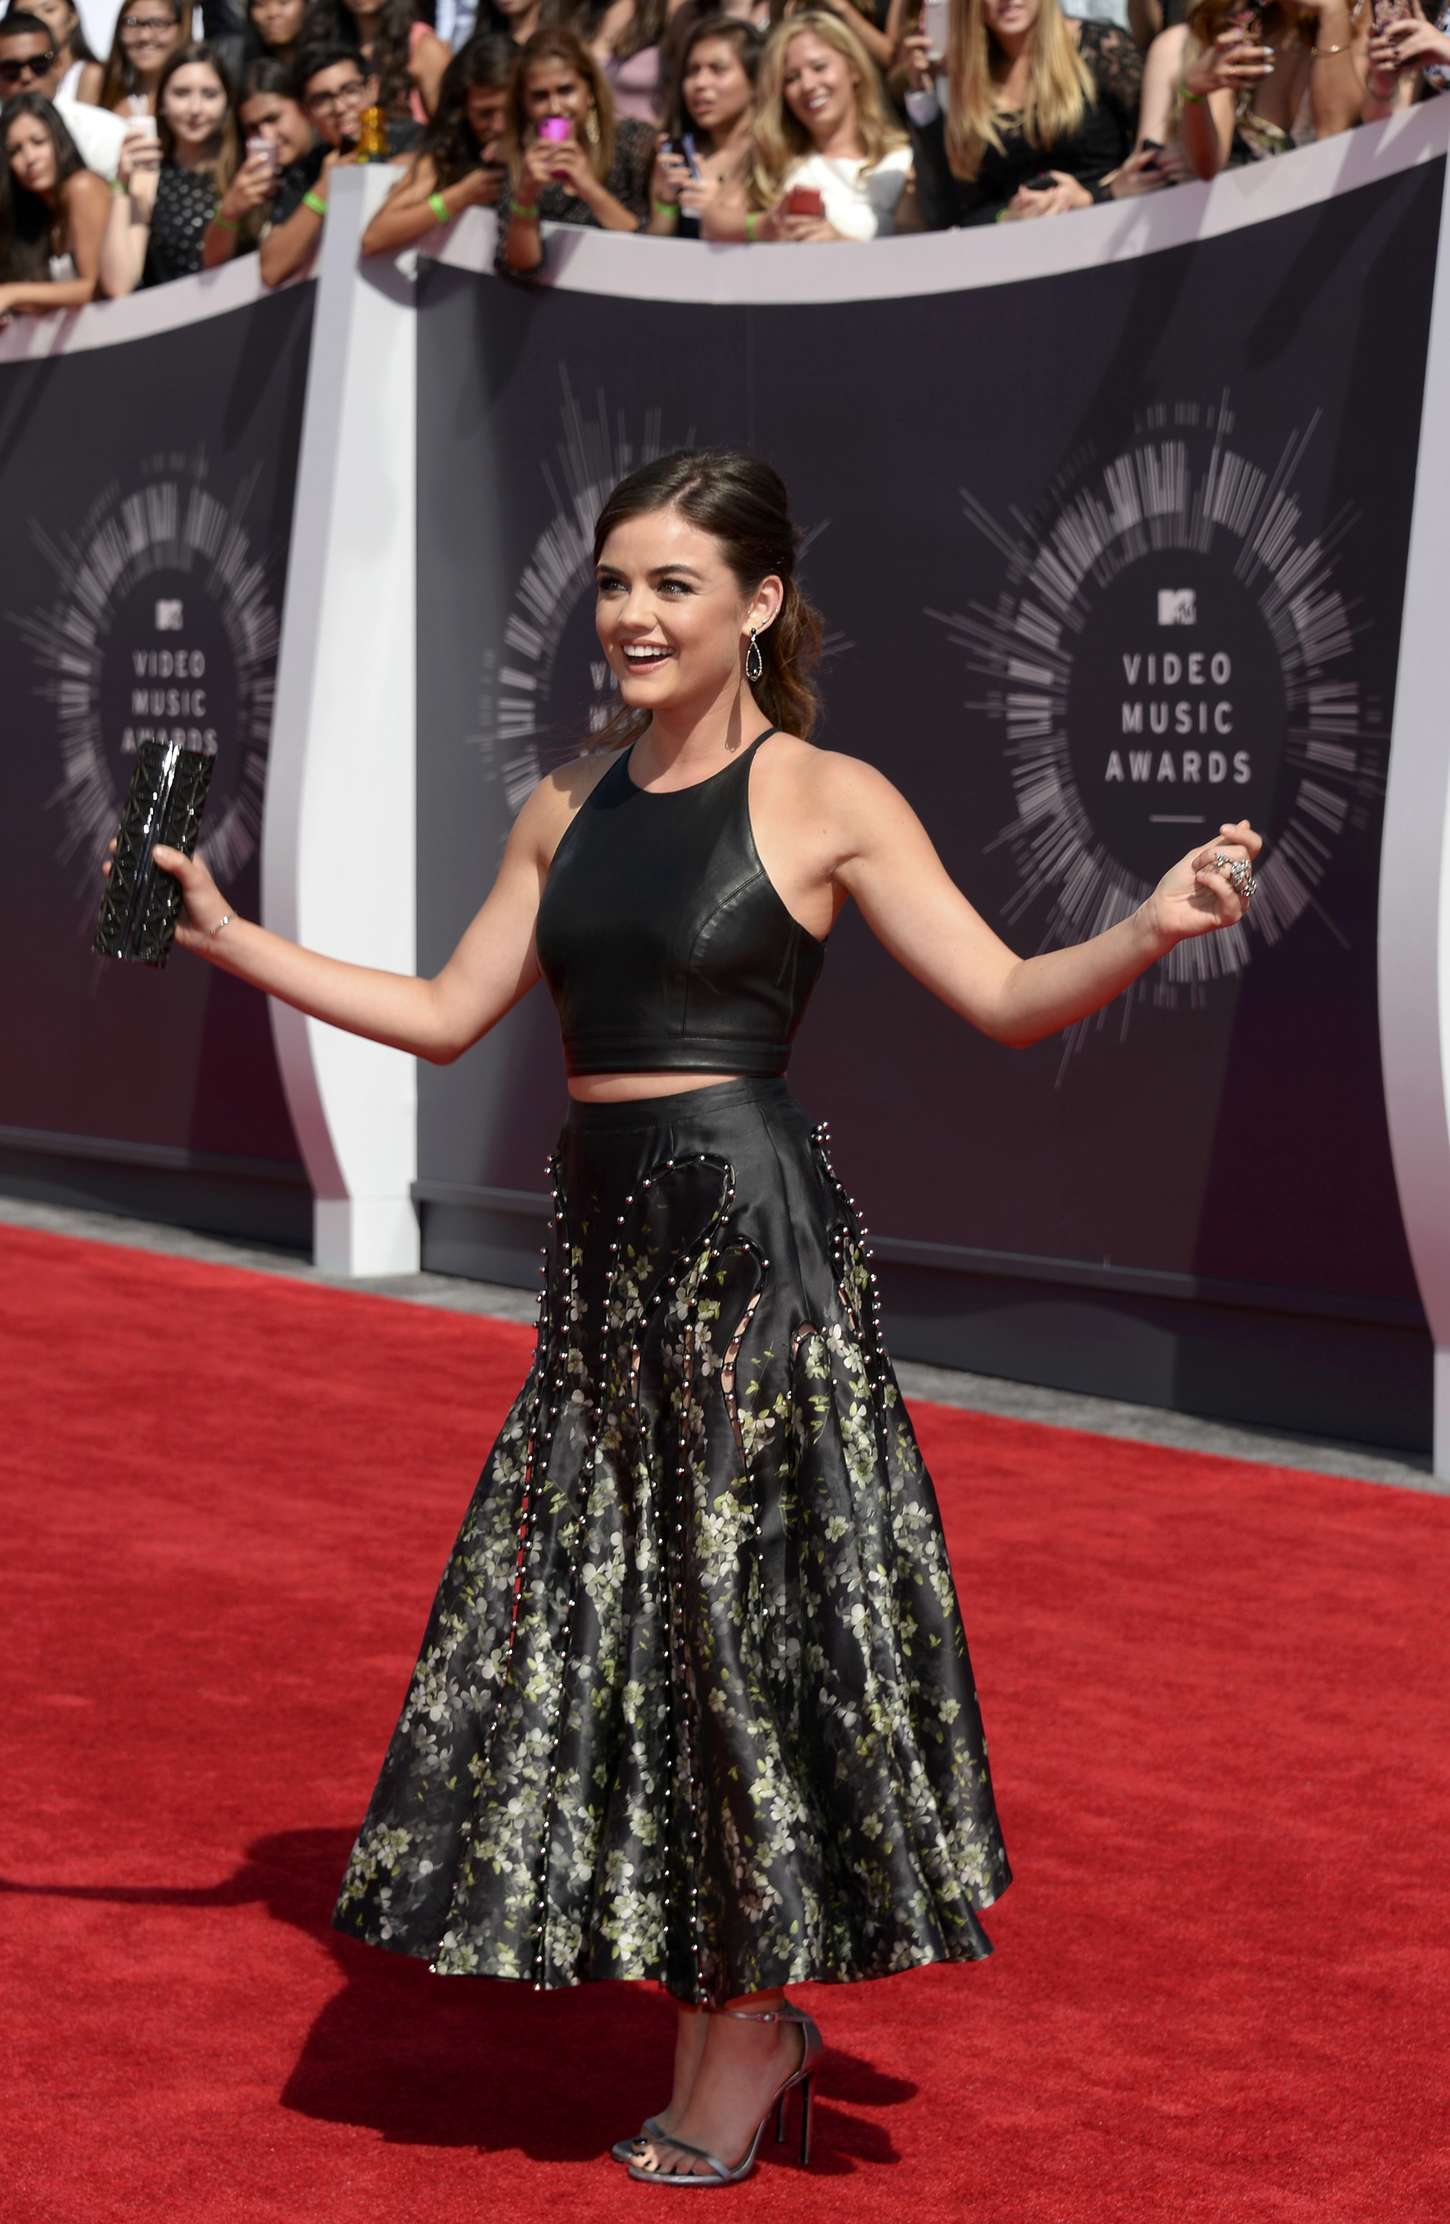 Lucy Hale 2014 : Lucy Hale: 2014 MTV Video Music Awards -09